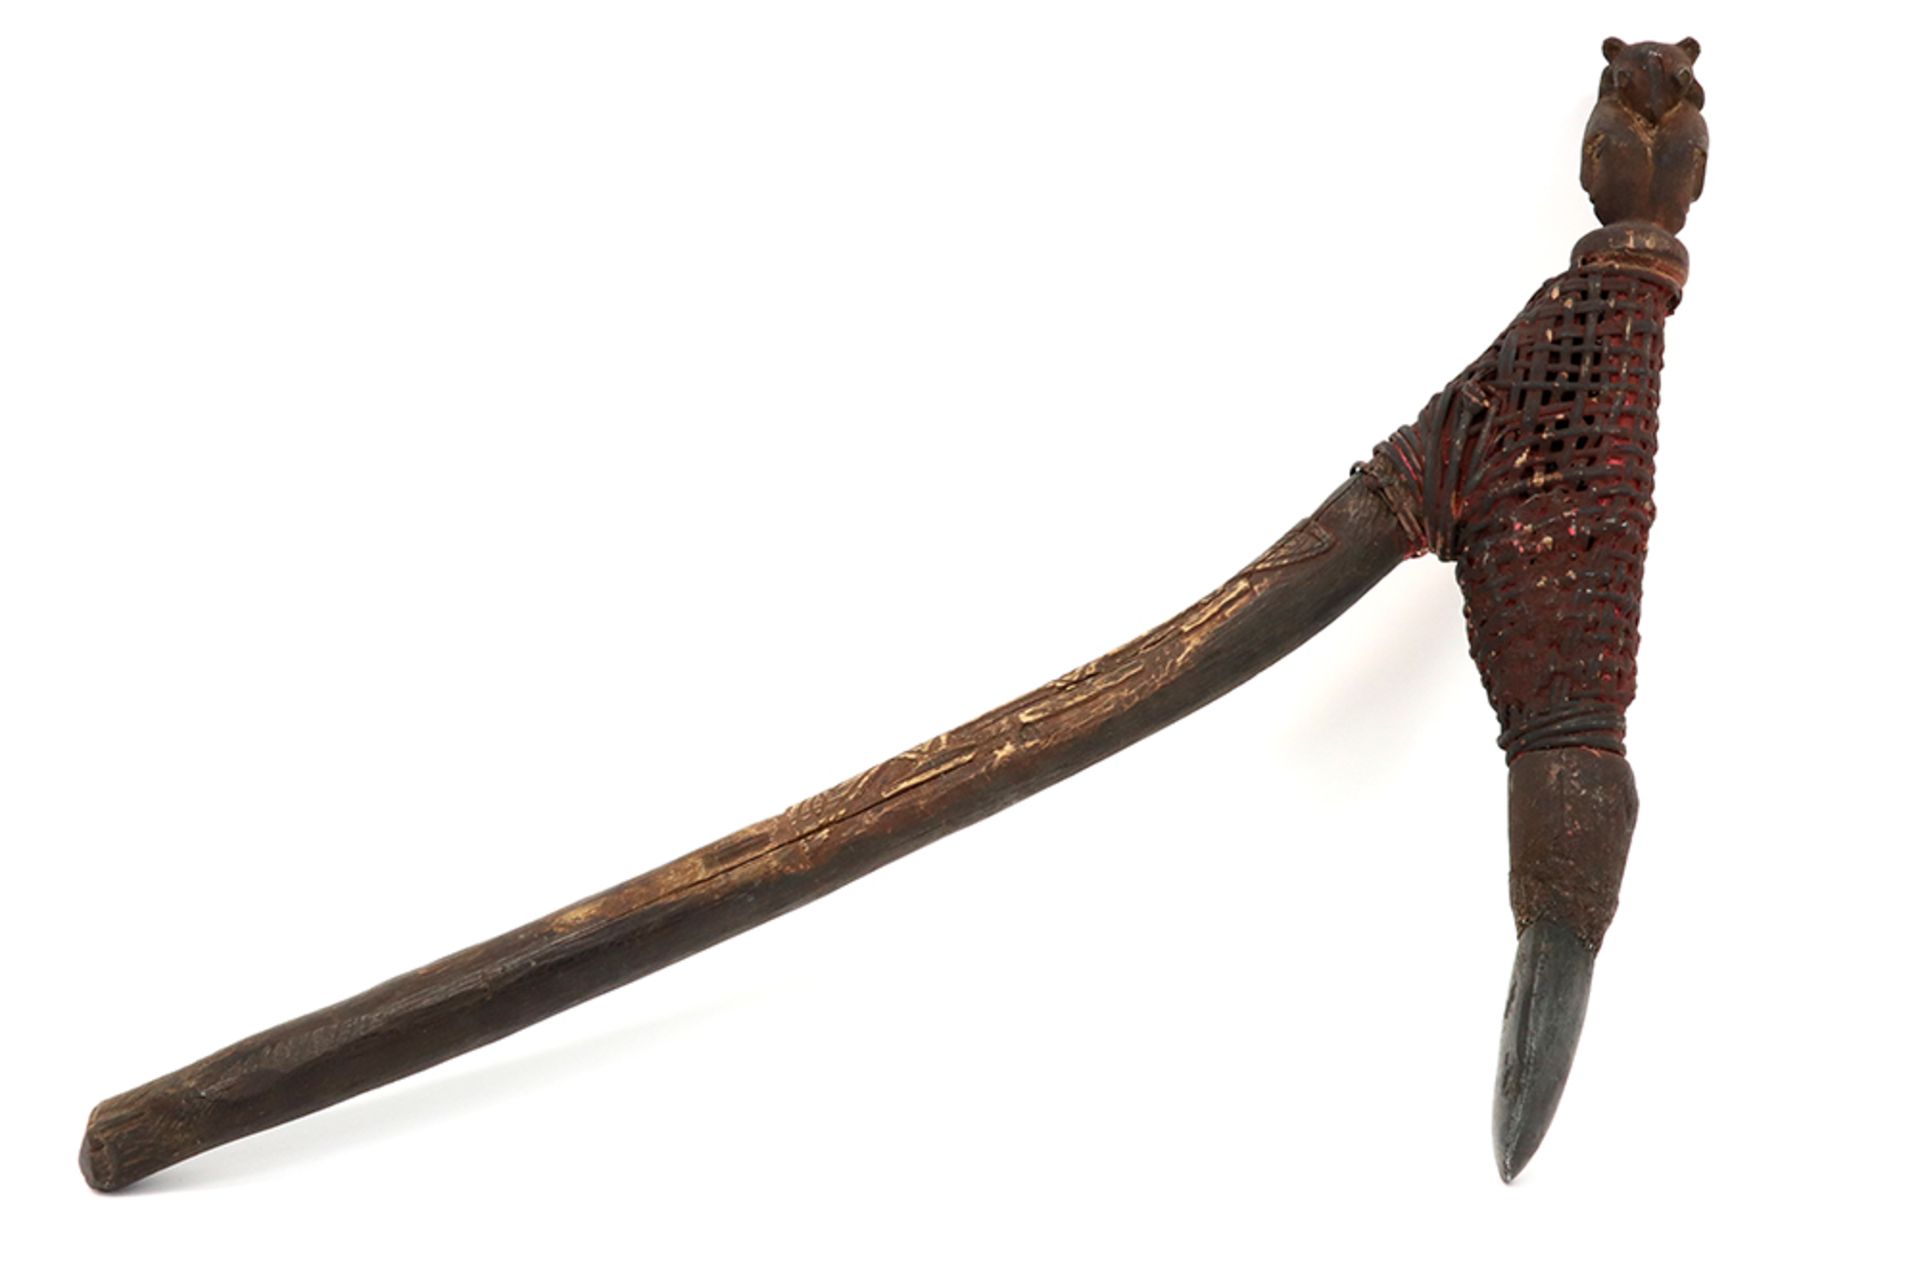 Papoa New Guinean Sepik axe in wood and fibers with remains of dye || PAPOEASIE NIEUW - GUINEA / - Image 2 of 3